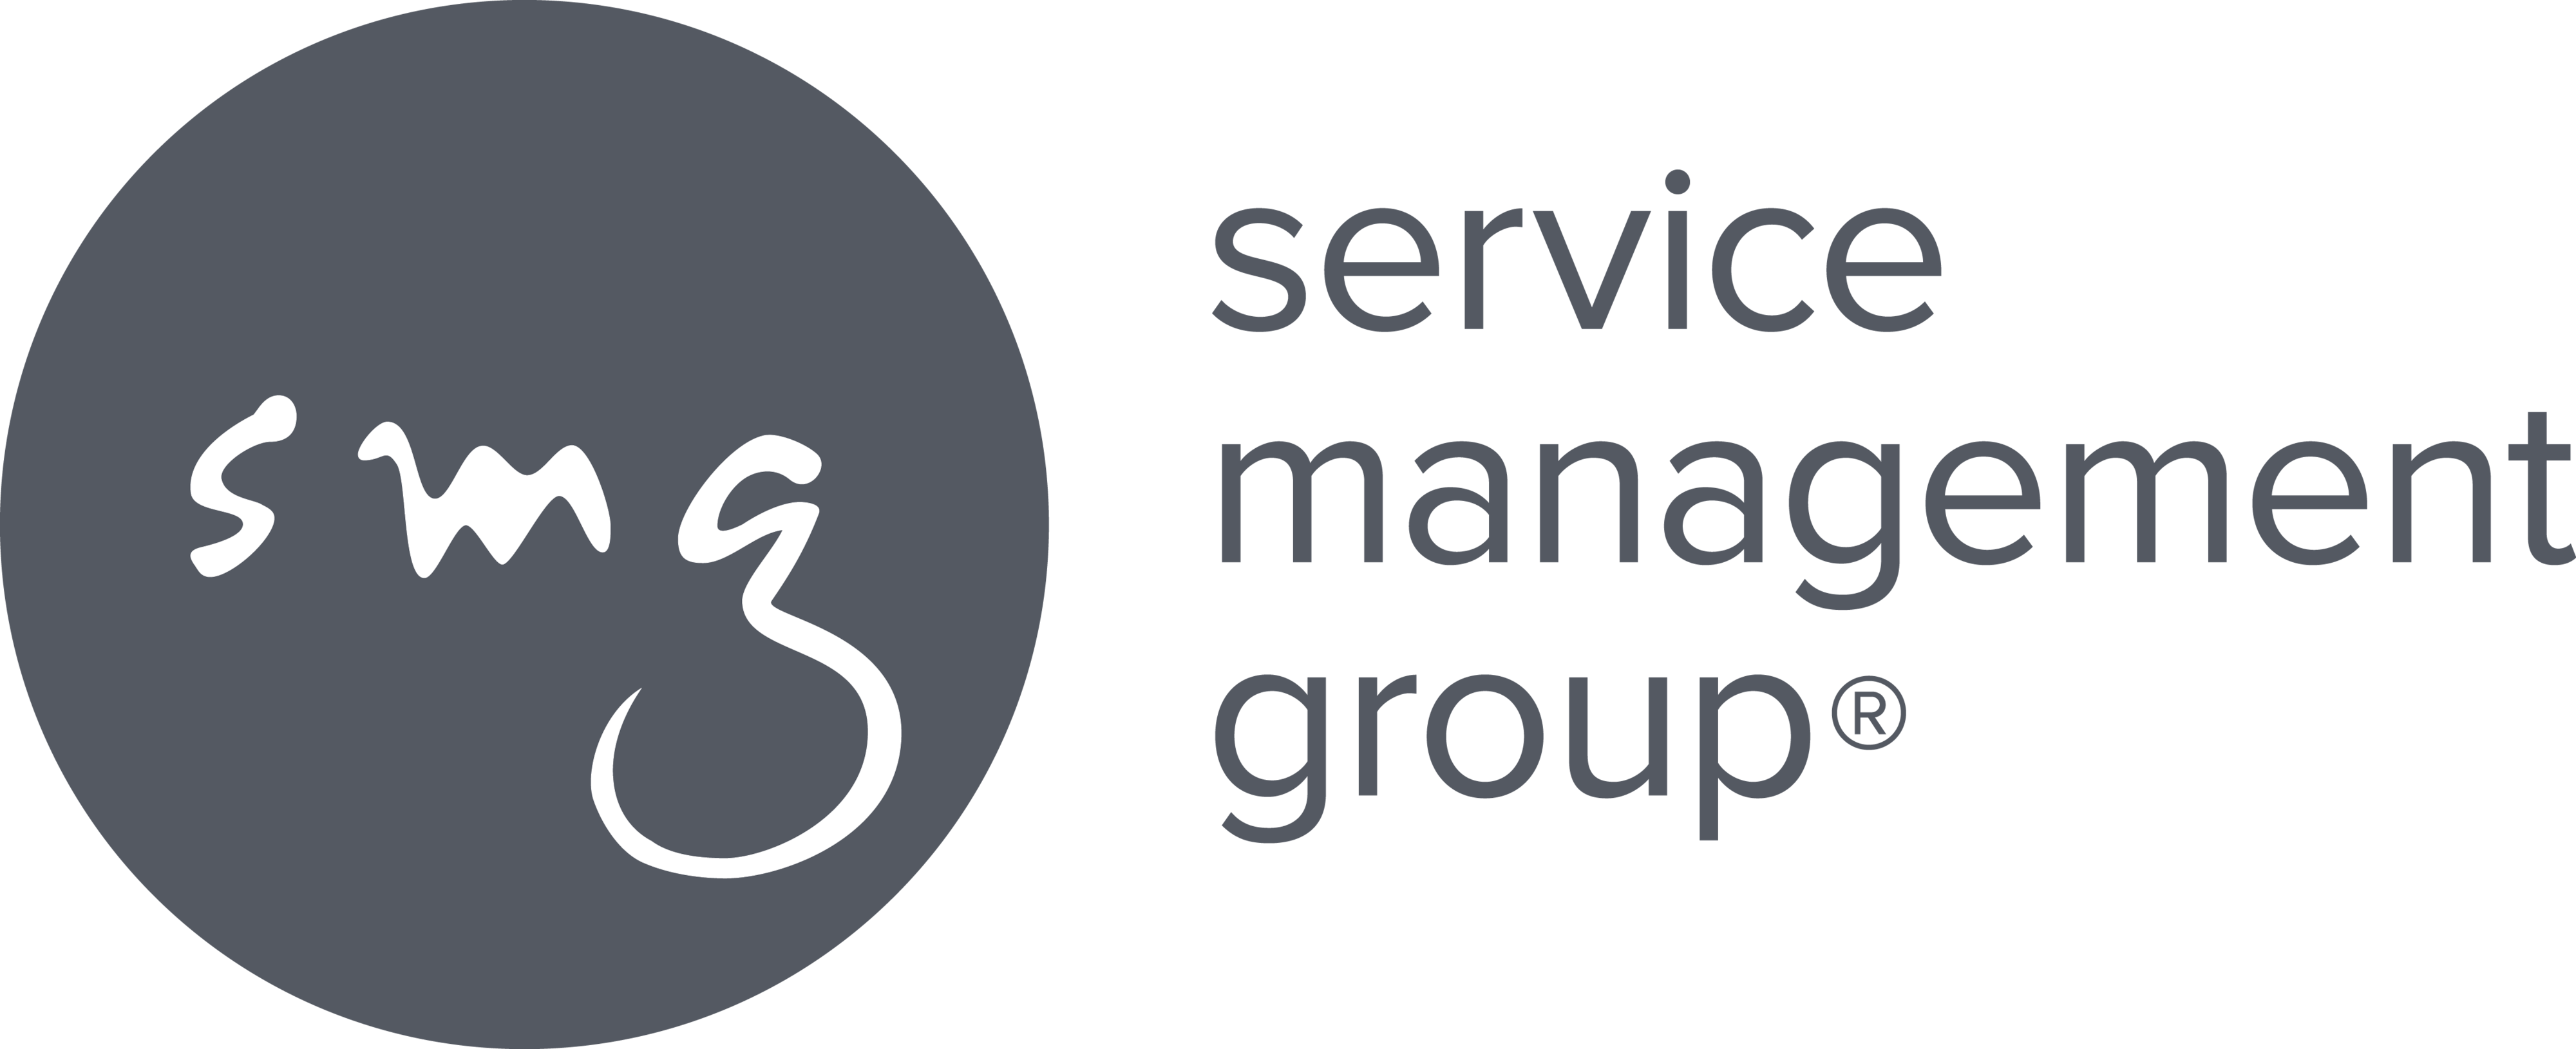 Service Management Group (SMG)